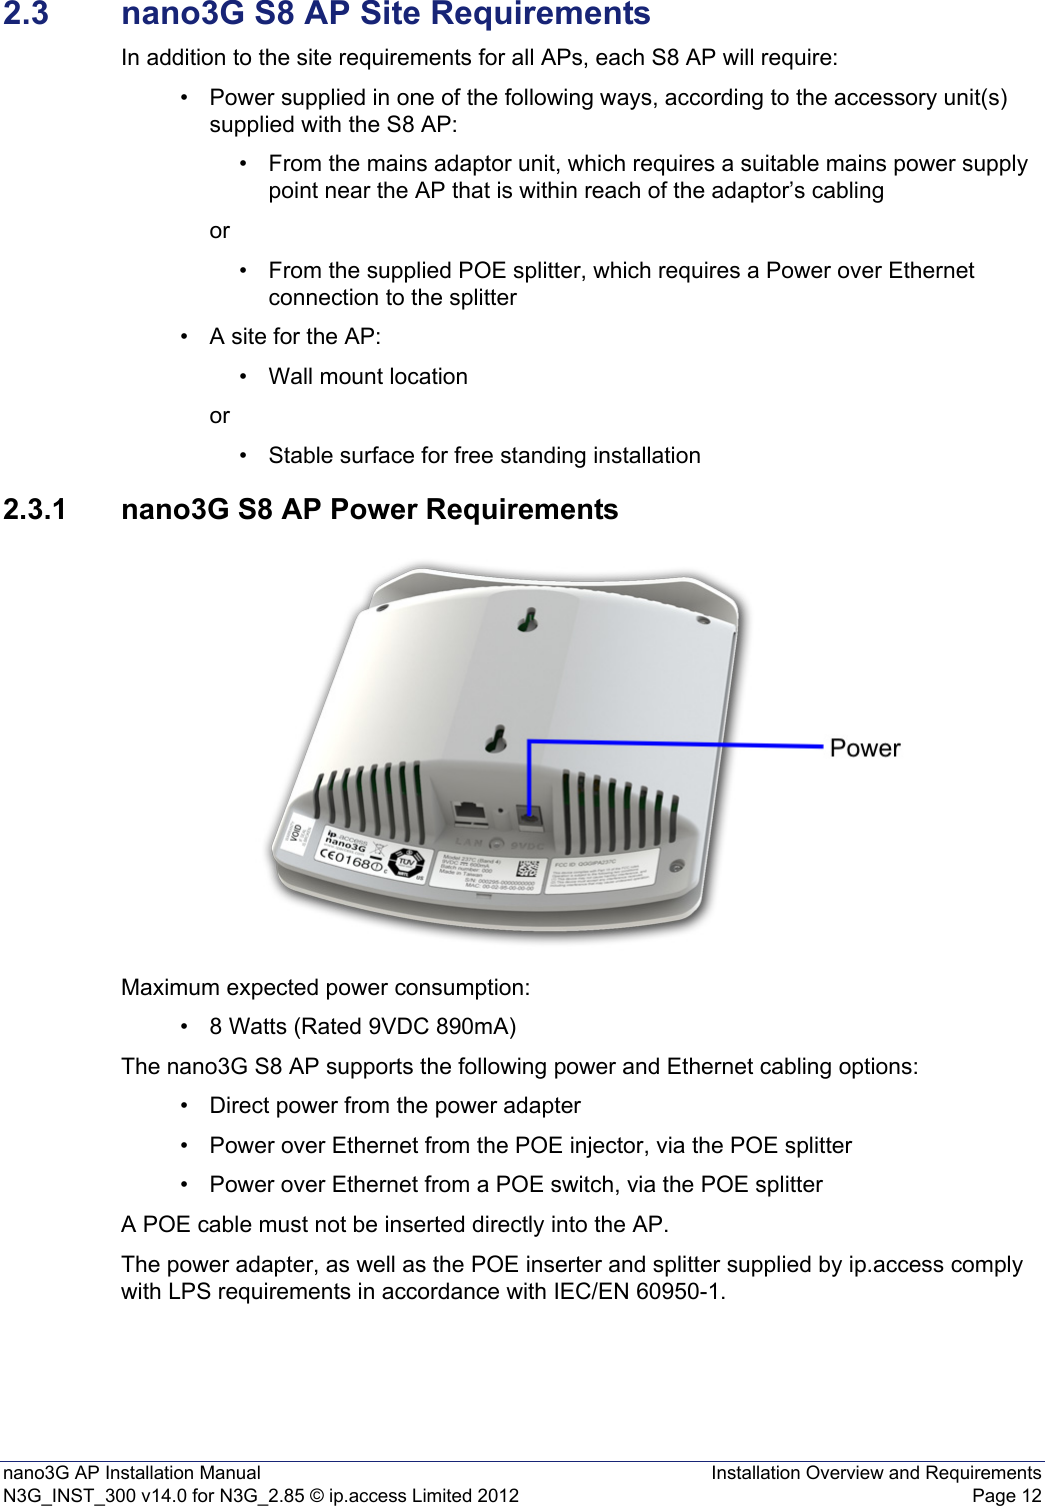 nano3G AP Installation Manual Installation Overview and RequirementsN3G_INST_300 v14.0 for N3G_2.85 © ip.access Limited 2012 Page 122.3 nano3G S8 AP Site RequirementsIn addition to the site requirements for all APs, each S8 AP will require:• Power supplied in one of the following ways, according to the accessory unit(s) supplied with the S8 AP:• From the mains adaptor unit, which requires a suitable mains power supply point near the AP that is within reach of the adaptor’s cablingor• From the supplied POE splitter, which requires a Power over Ethernet connection to the splitter • A site for the AP:• Wall mount locationor• Stable surface for free standing installation 2.3.1 nano3G S8 AP Power RequirementsMaximum expected power consumption:• 8 Watts (Rated 9VDC 890mA)The nano3G S8 AP supports the following power and Ethernet cabling options:• Direct power from the power adapter• Power over Ethernet from the POE injector, via the POE splitter• Power over Ethernet from a POE switch, via the POE splitterA POE cable must not be inserted directly into the AP.The power adapter, as well as the POE inserter and splitter supplied by ip.access comply with LPS requirements in accordance with IEC/EN 60950-1.